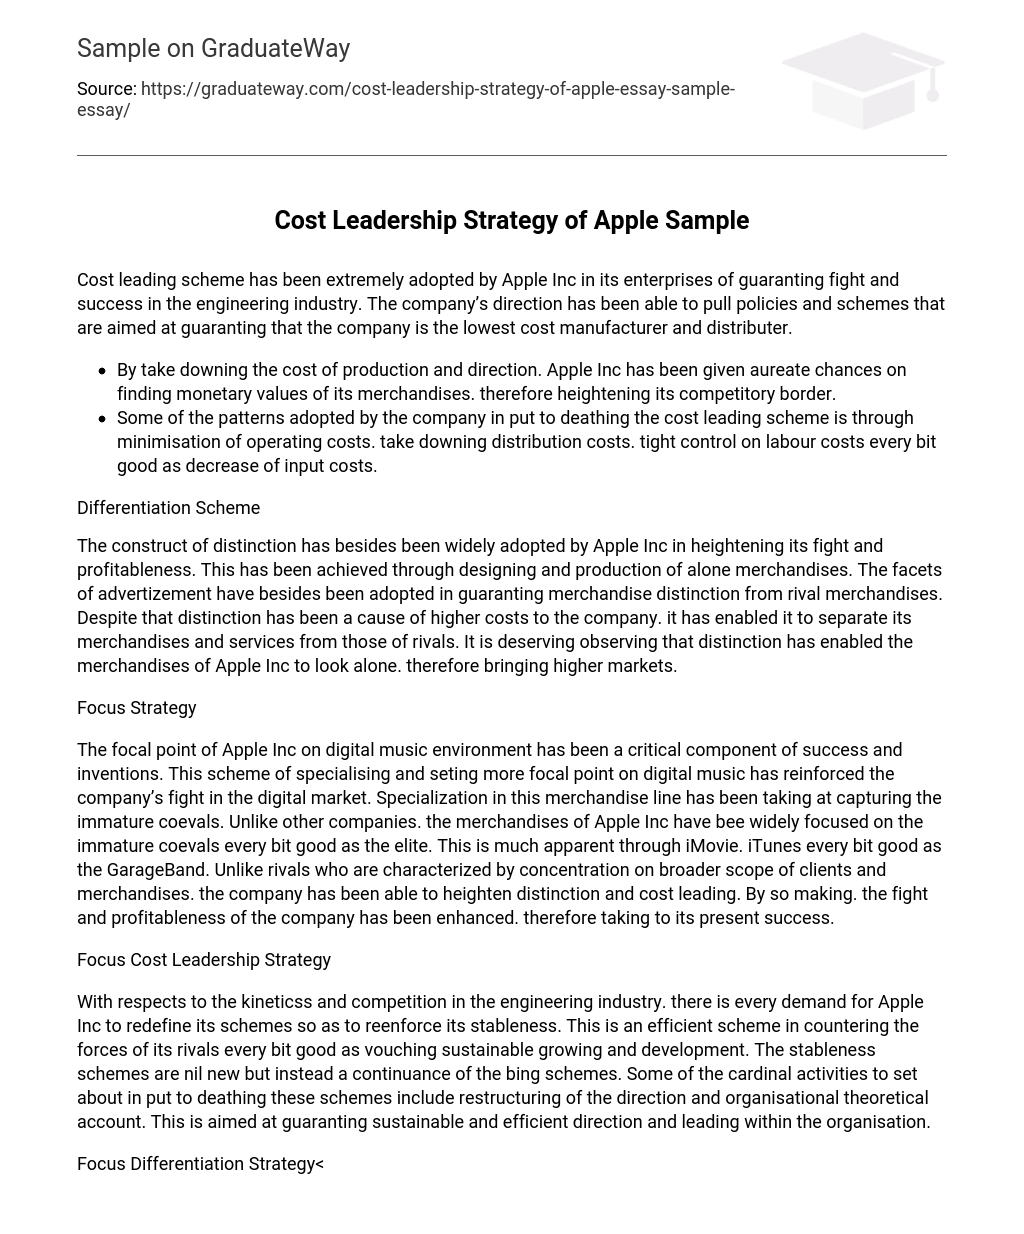 Cost Leadership Strategy of Apple Sample